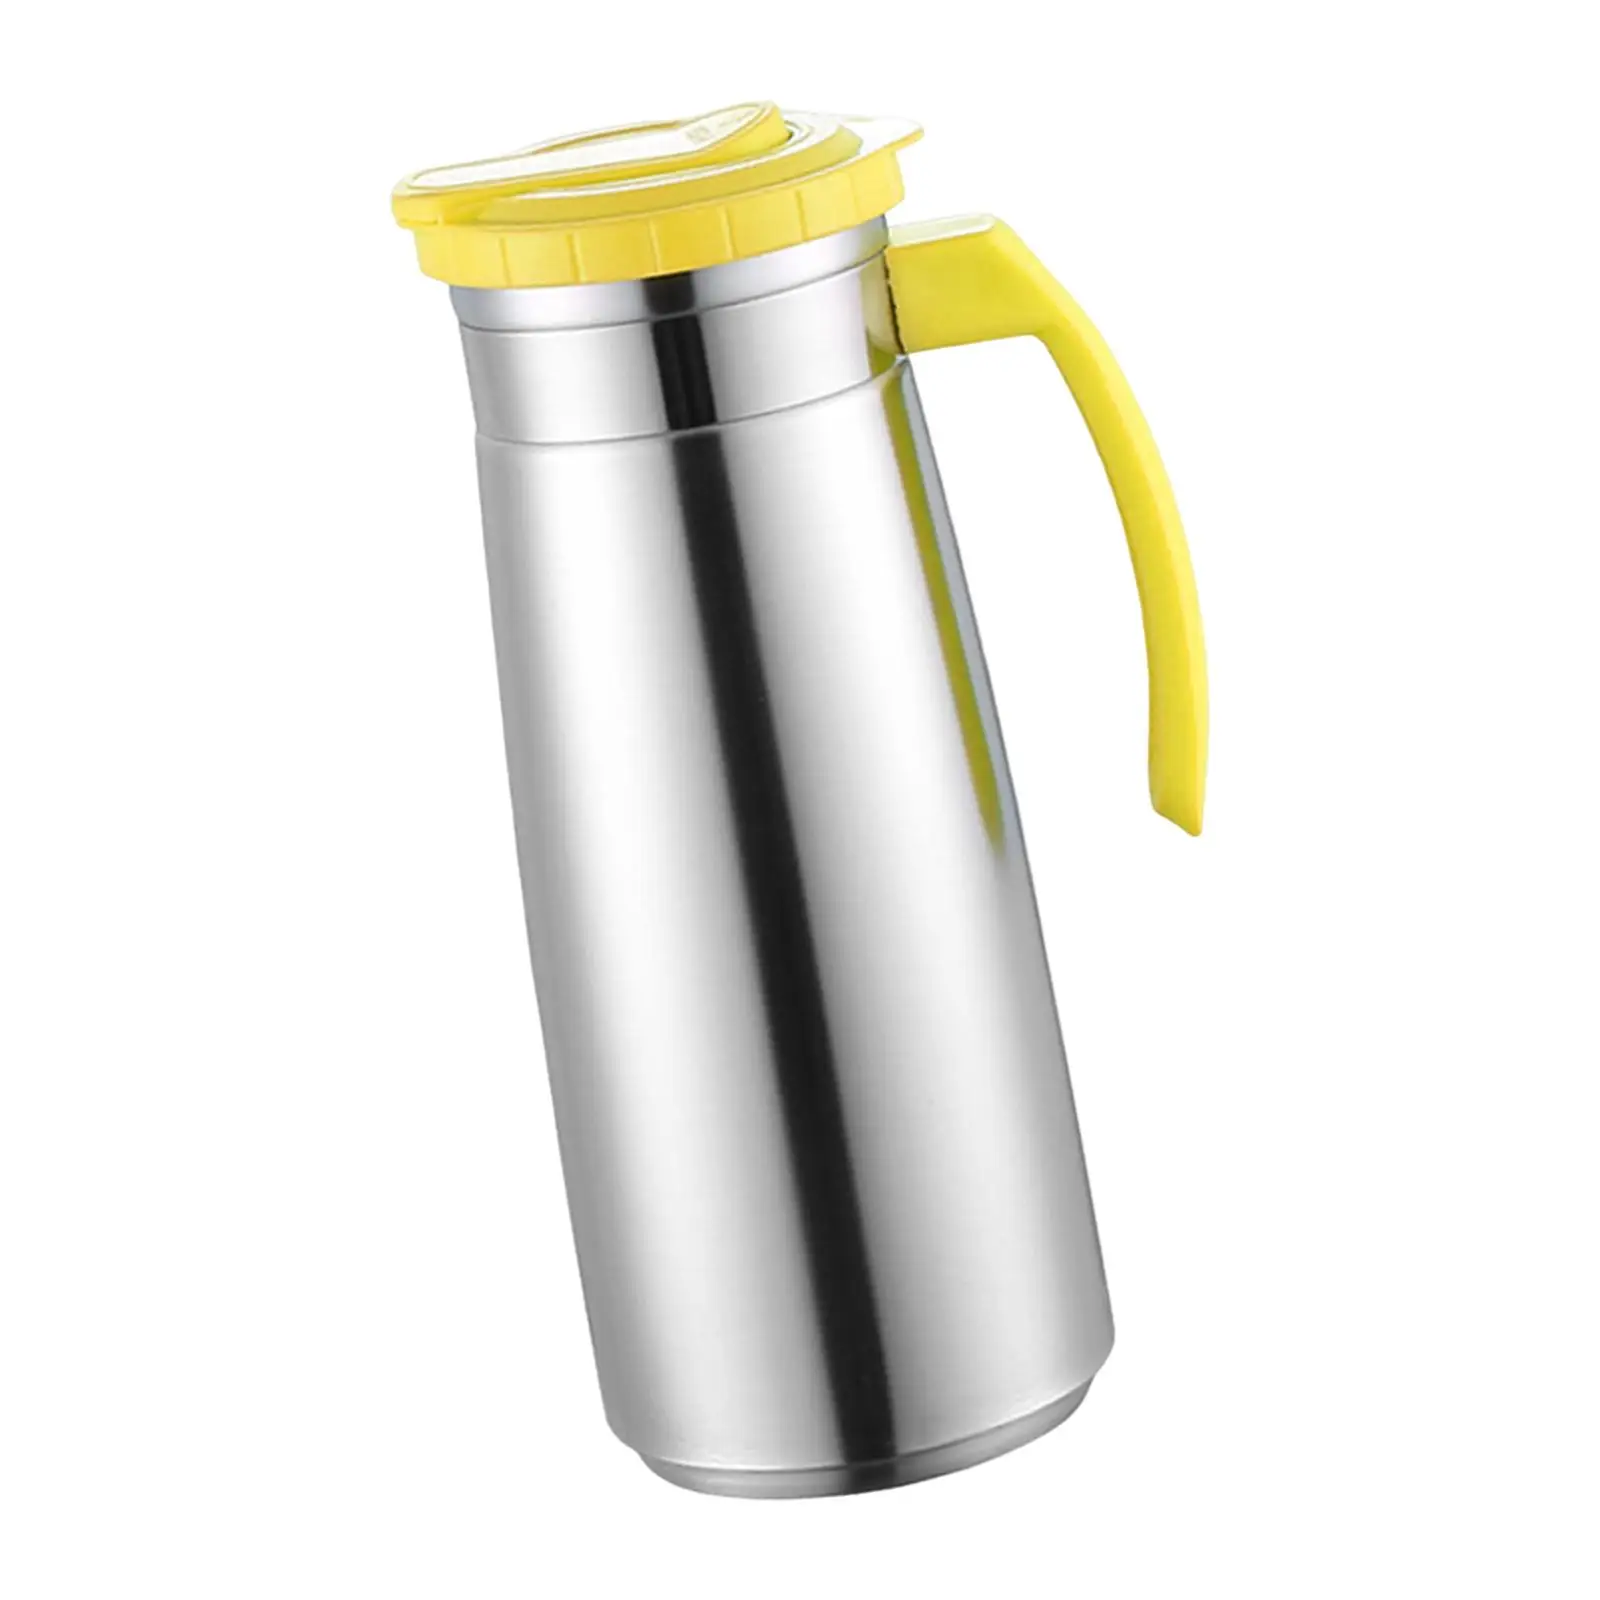 Stainless Steel Jug Carafes Sealed Lid Teapot Kettle Cold Water Kettle for Barbecue Fridge Picnic Holiday Home